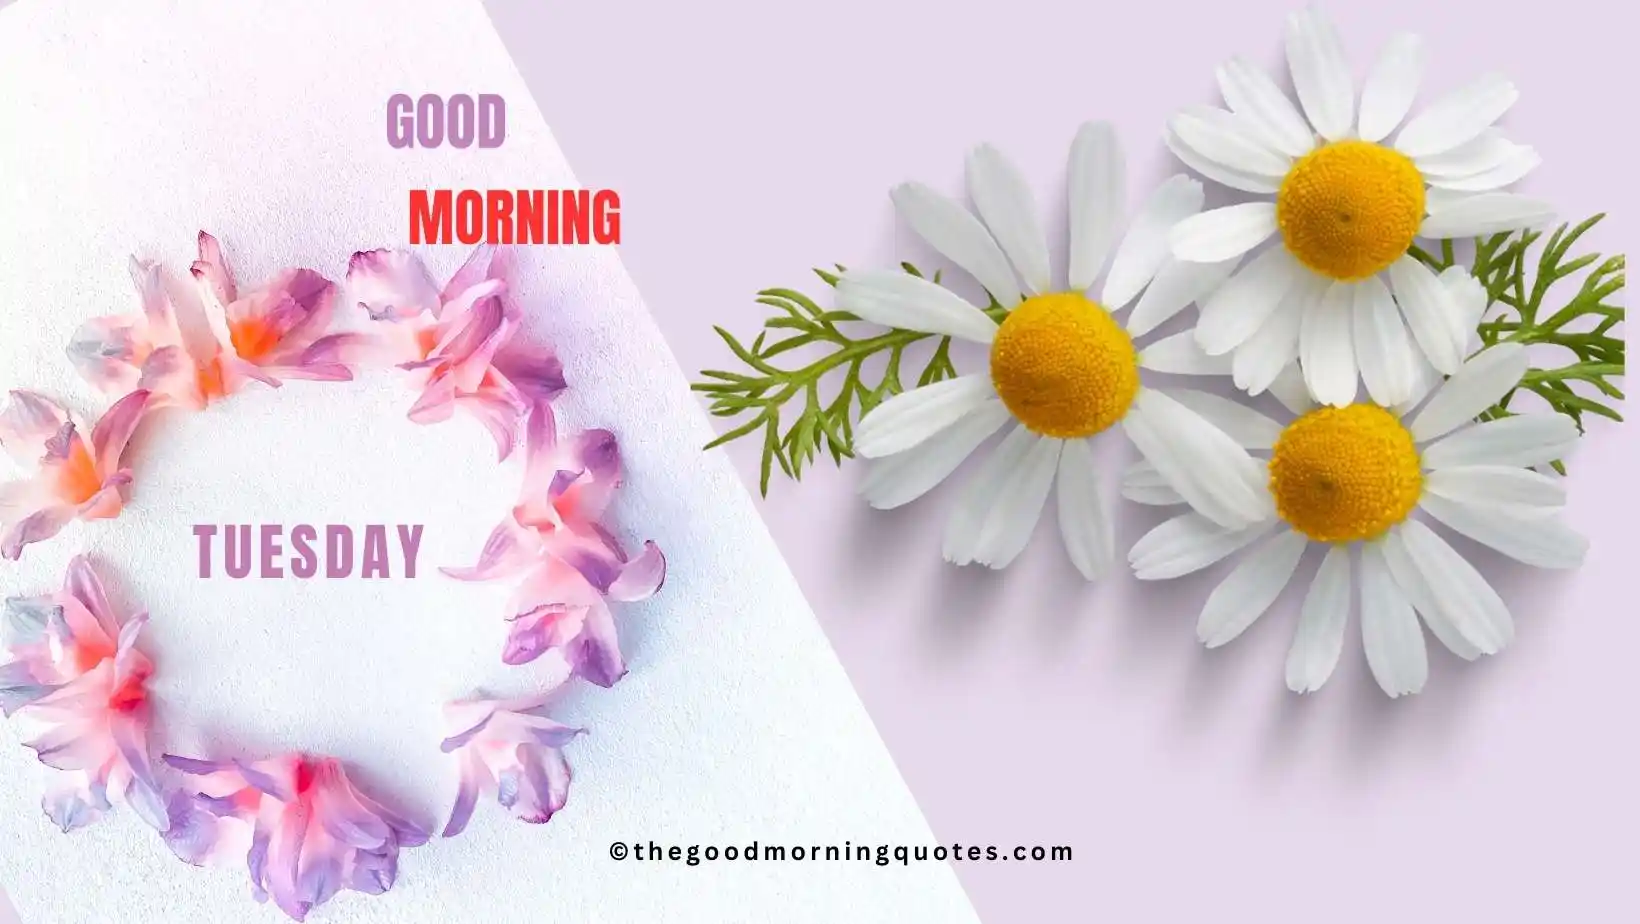 Tuesday Good Morning Quotes in Hindi